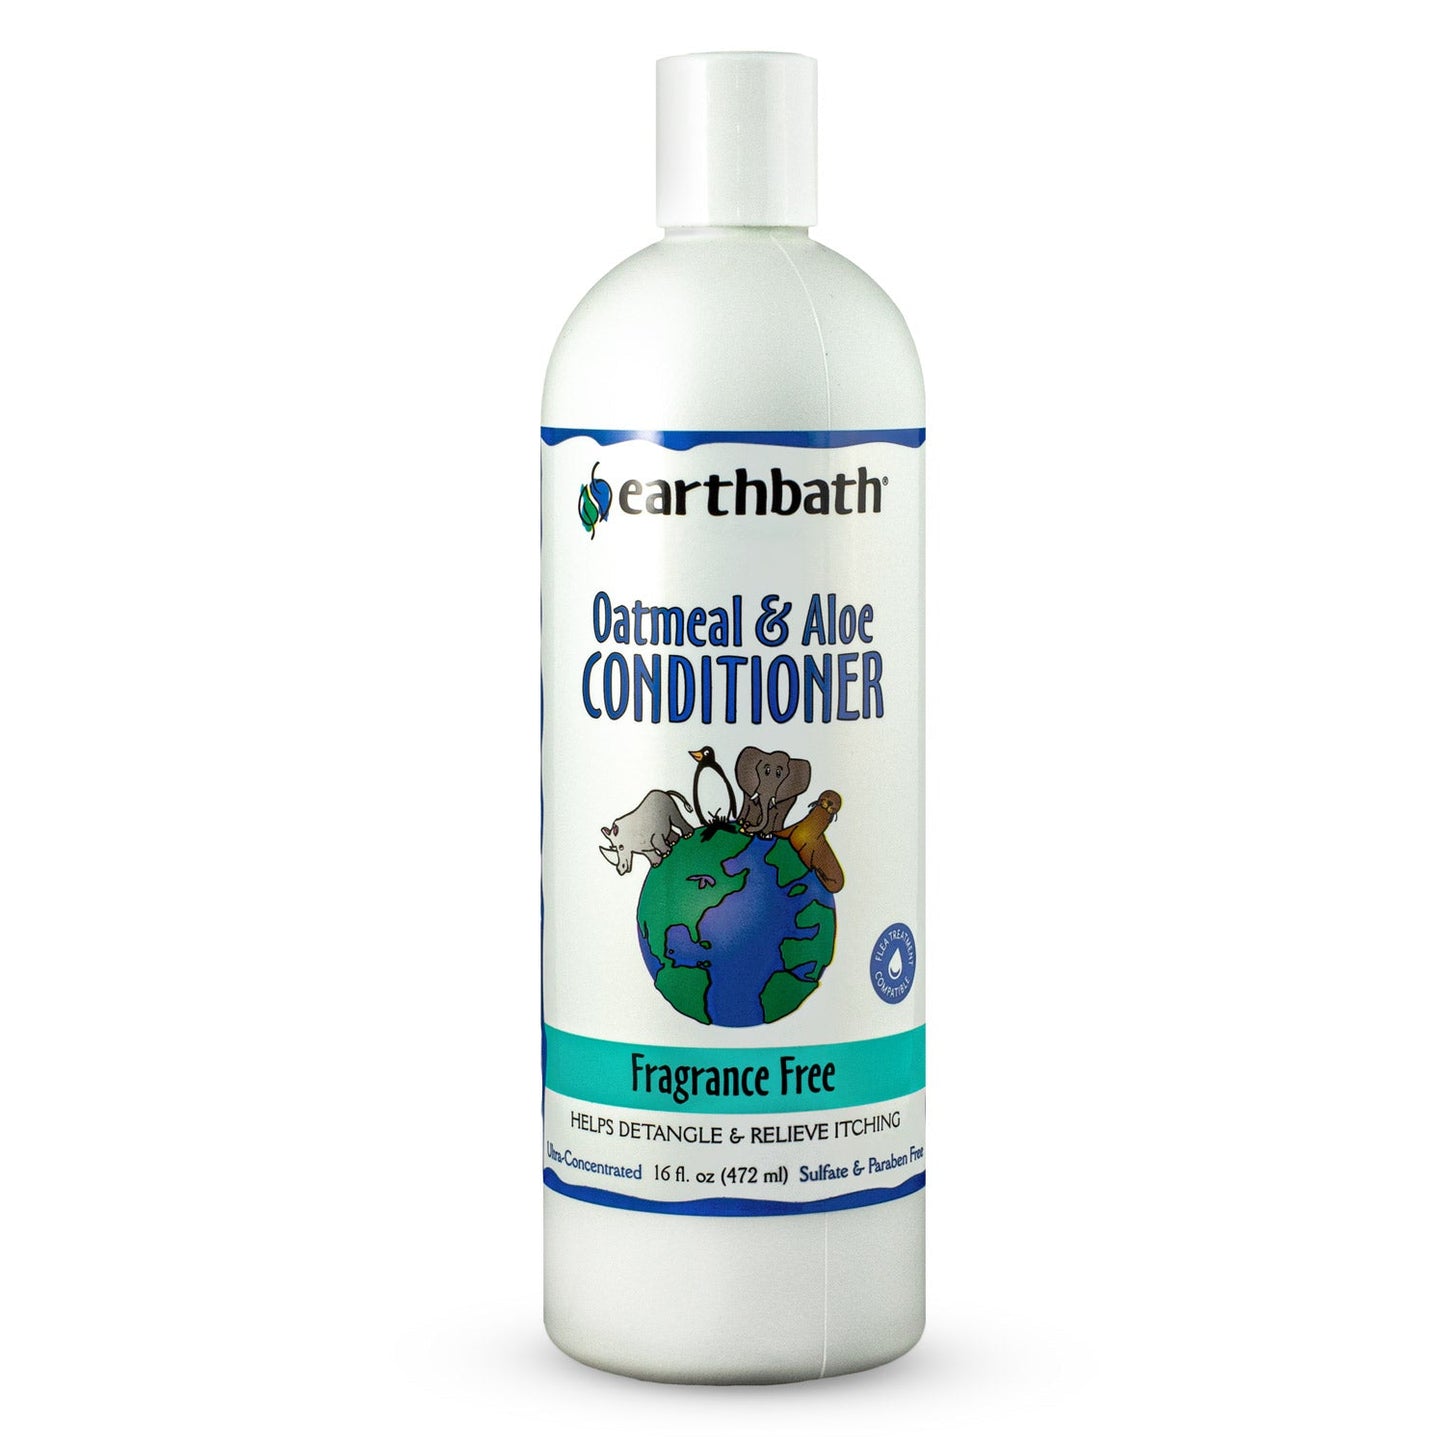 earthbath® Oatmeal & Aloe Conditioner, Fragrance Free, Helps Relieve Itchy Dry Skin